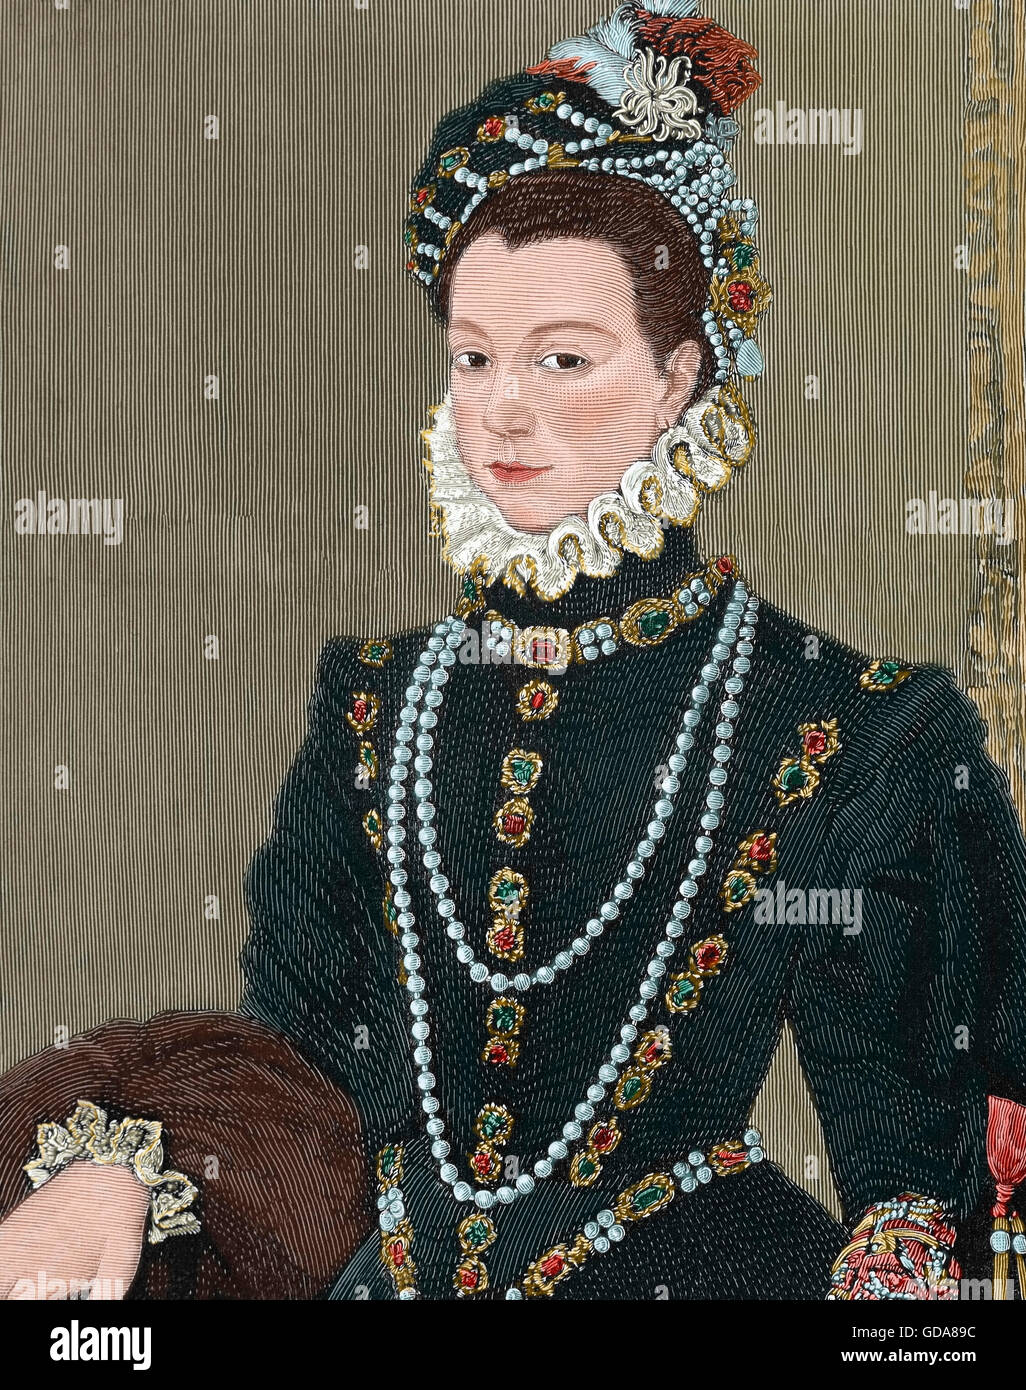 Elisabeth of Valois (1545-1568). Spanish queen consort. The eldest daughter of Henry II of France and Catherine de' Medici. Third wife of the king Philip II of Spain. Portrait. Engraving. Colored. Stock Photo